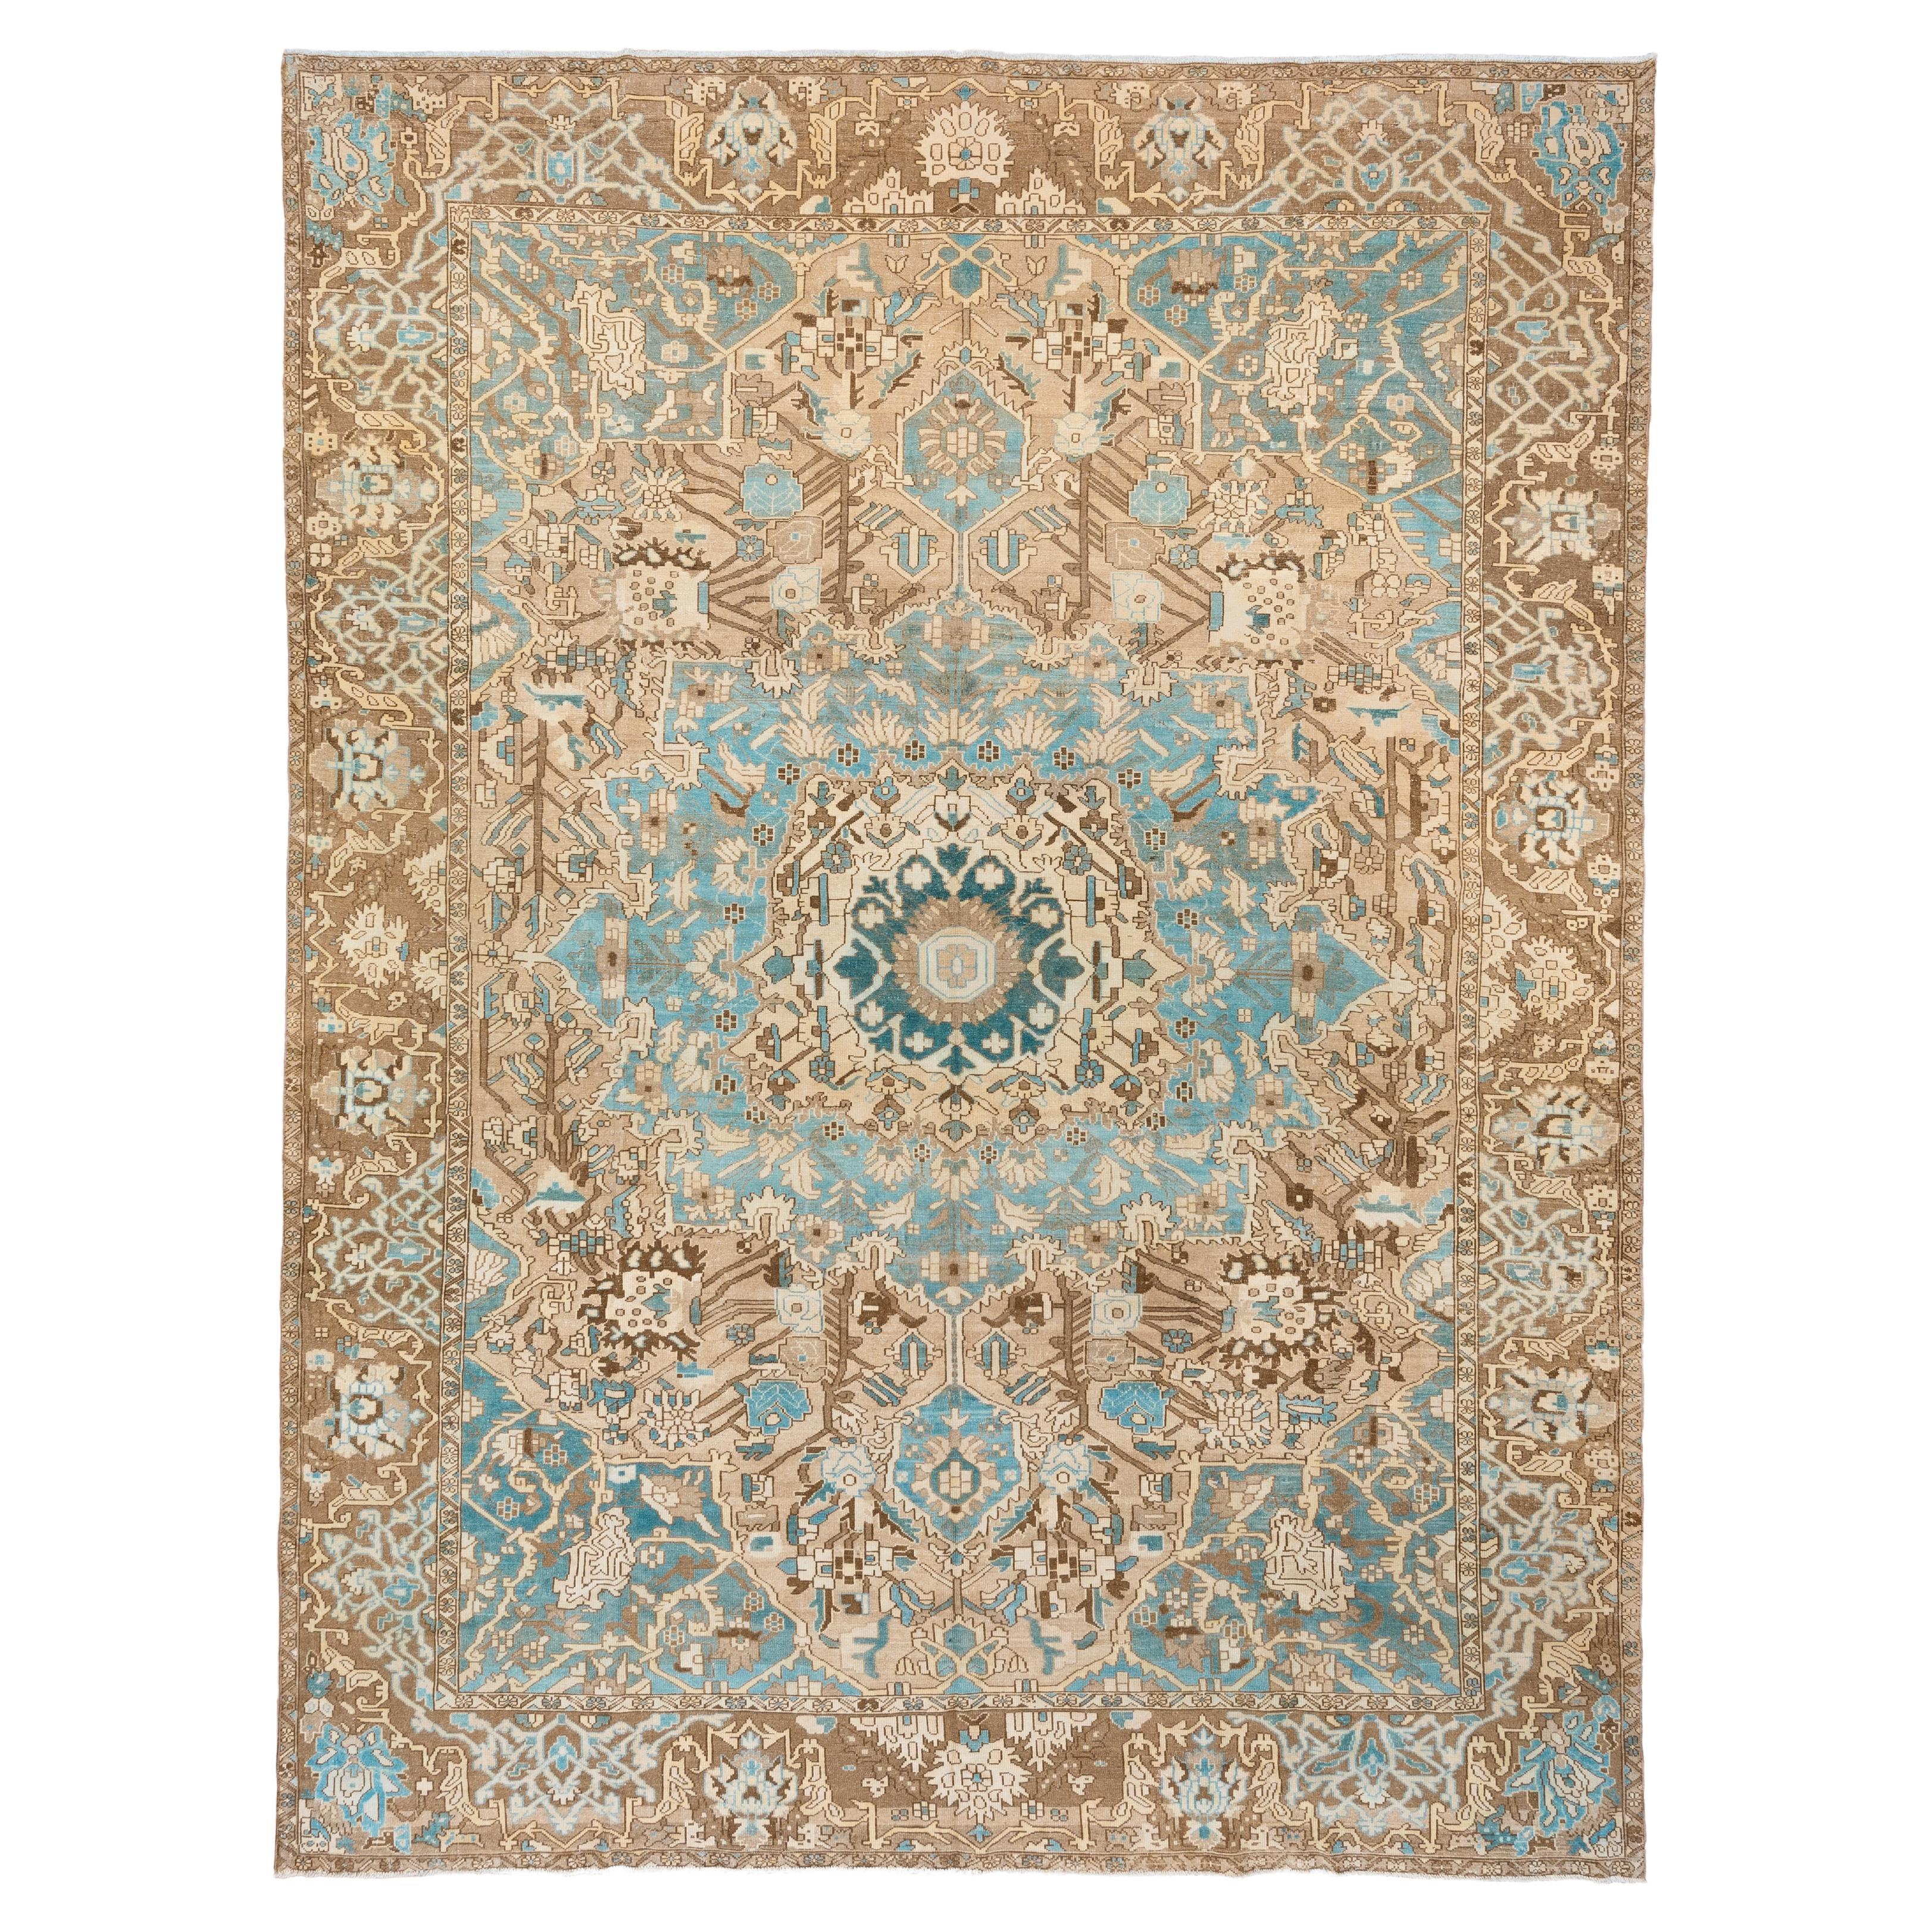 Antique Persian Bakhtiari Carpet with Blues and Browns